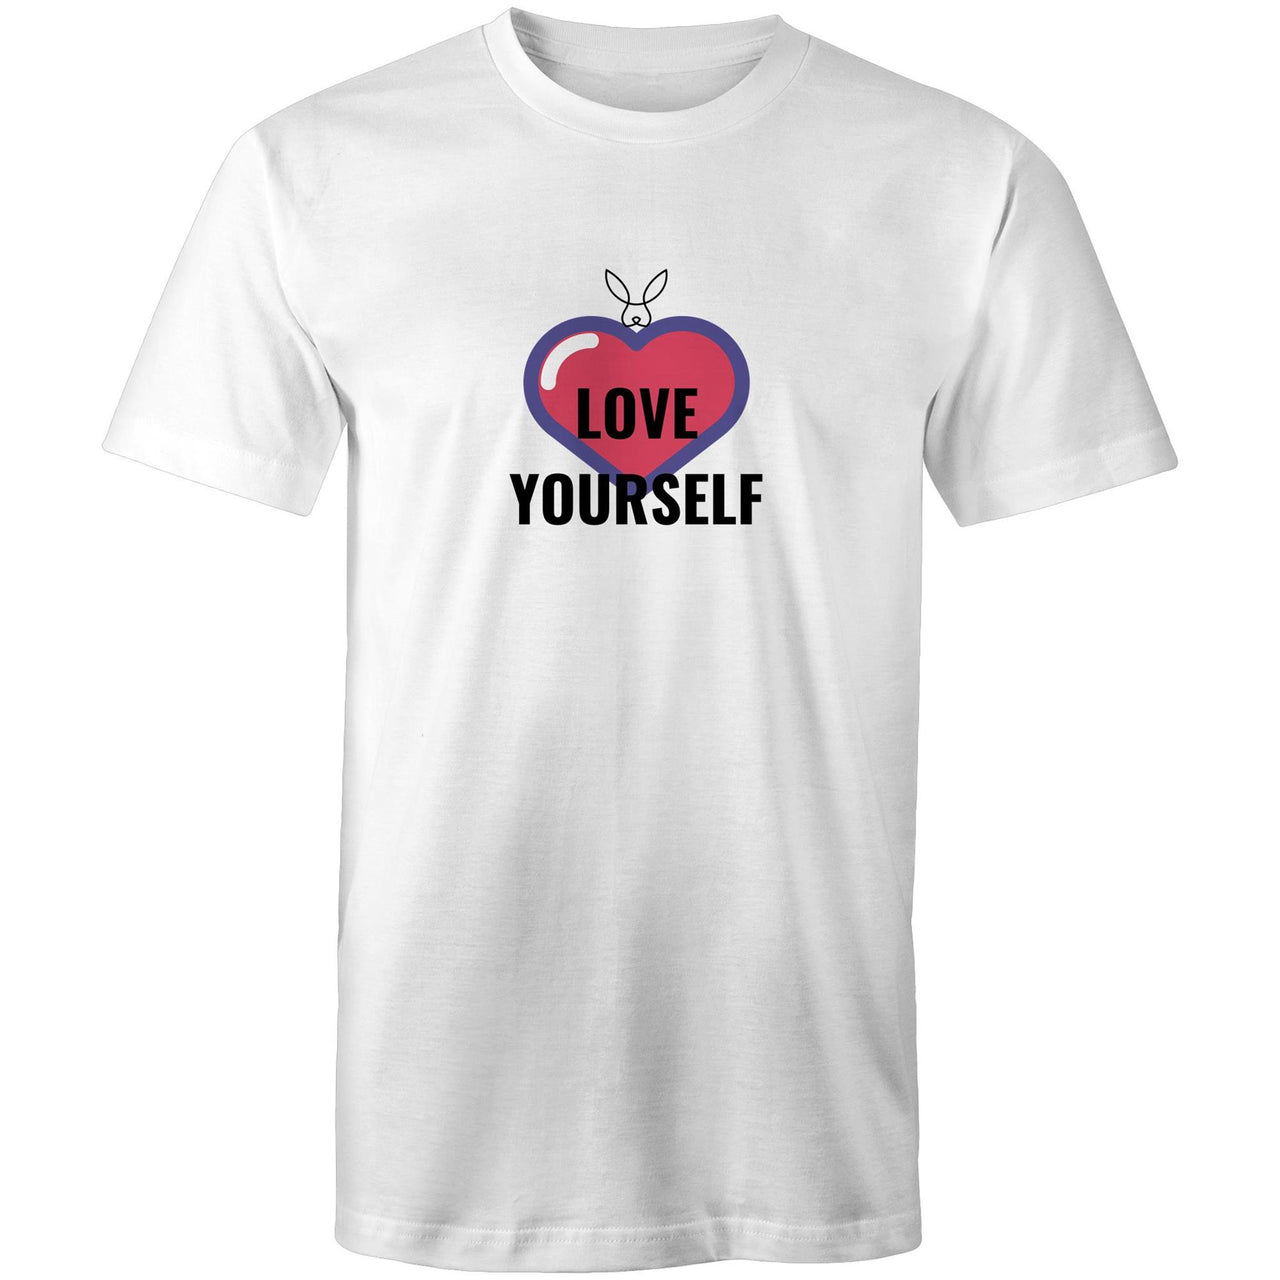 Love Yourself Crew T-Shirt by CBF Clothing White